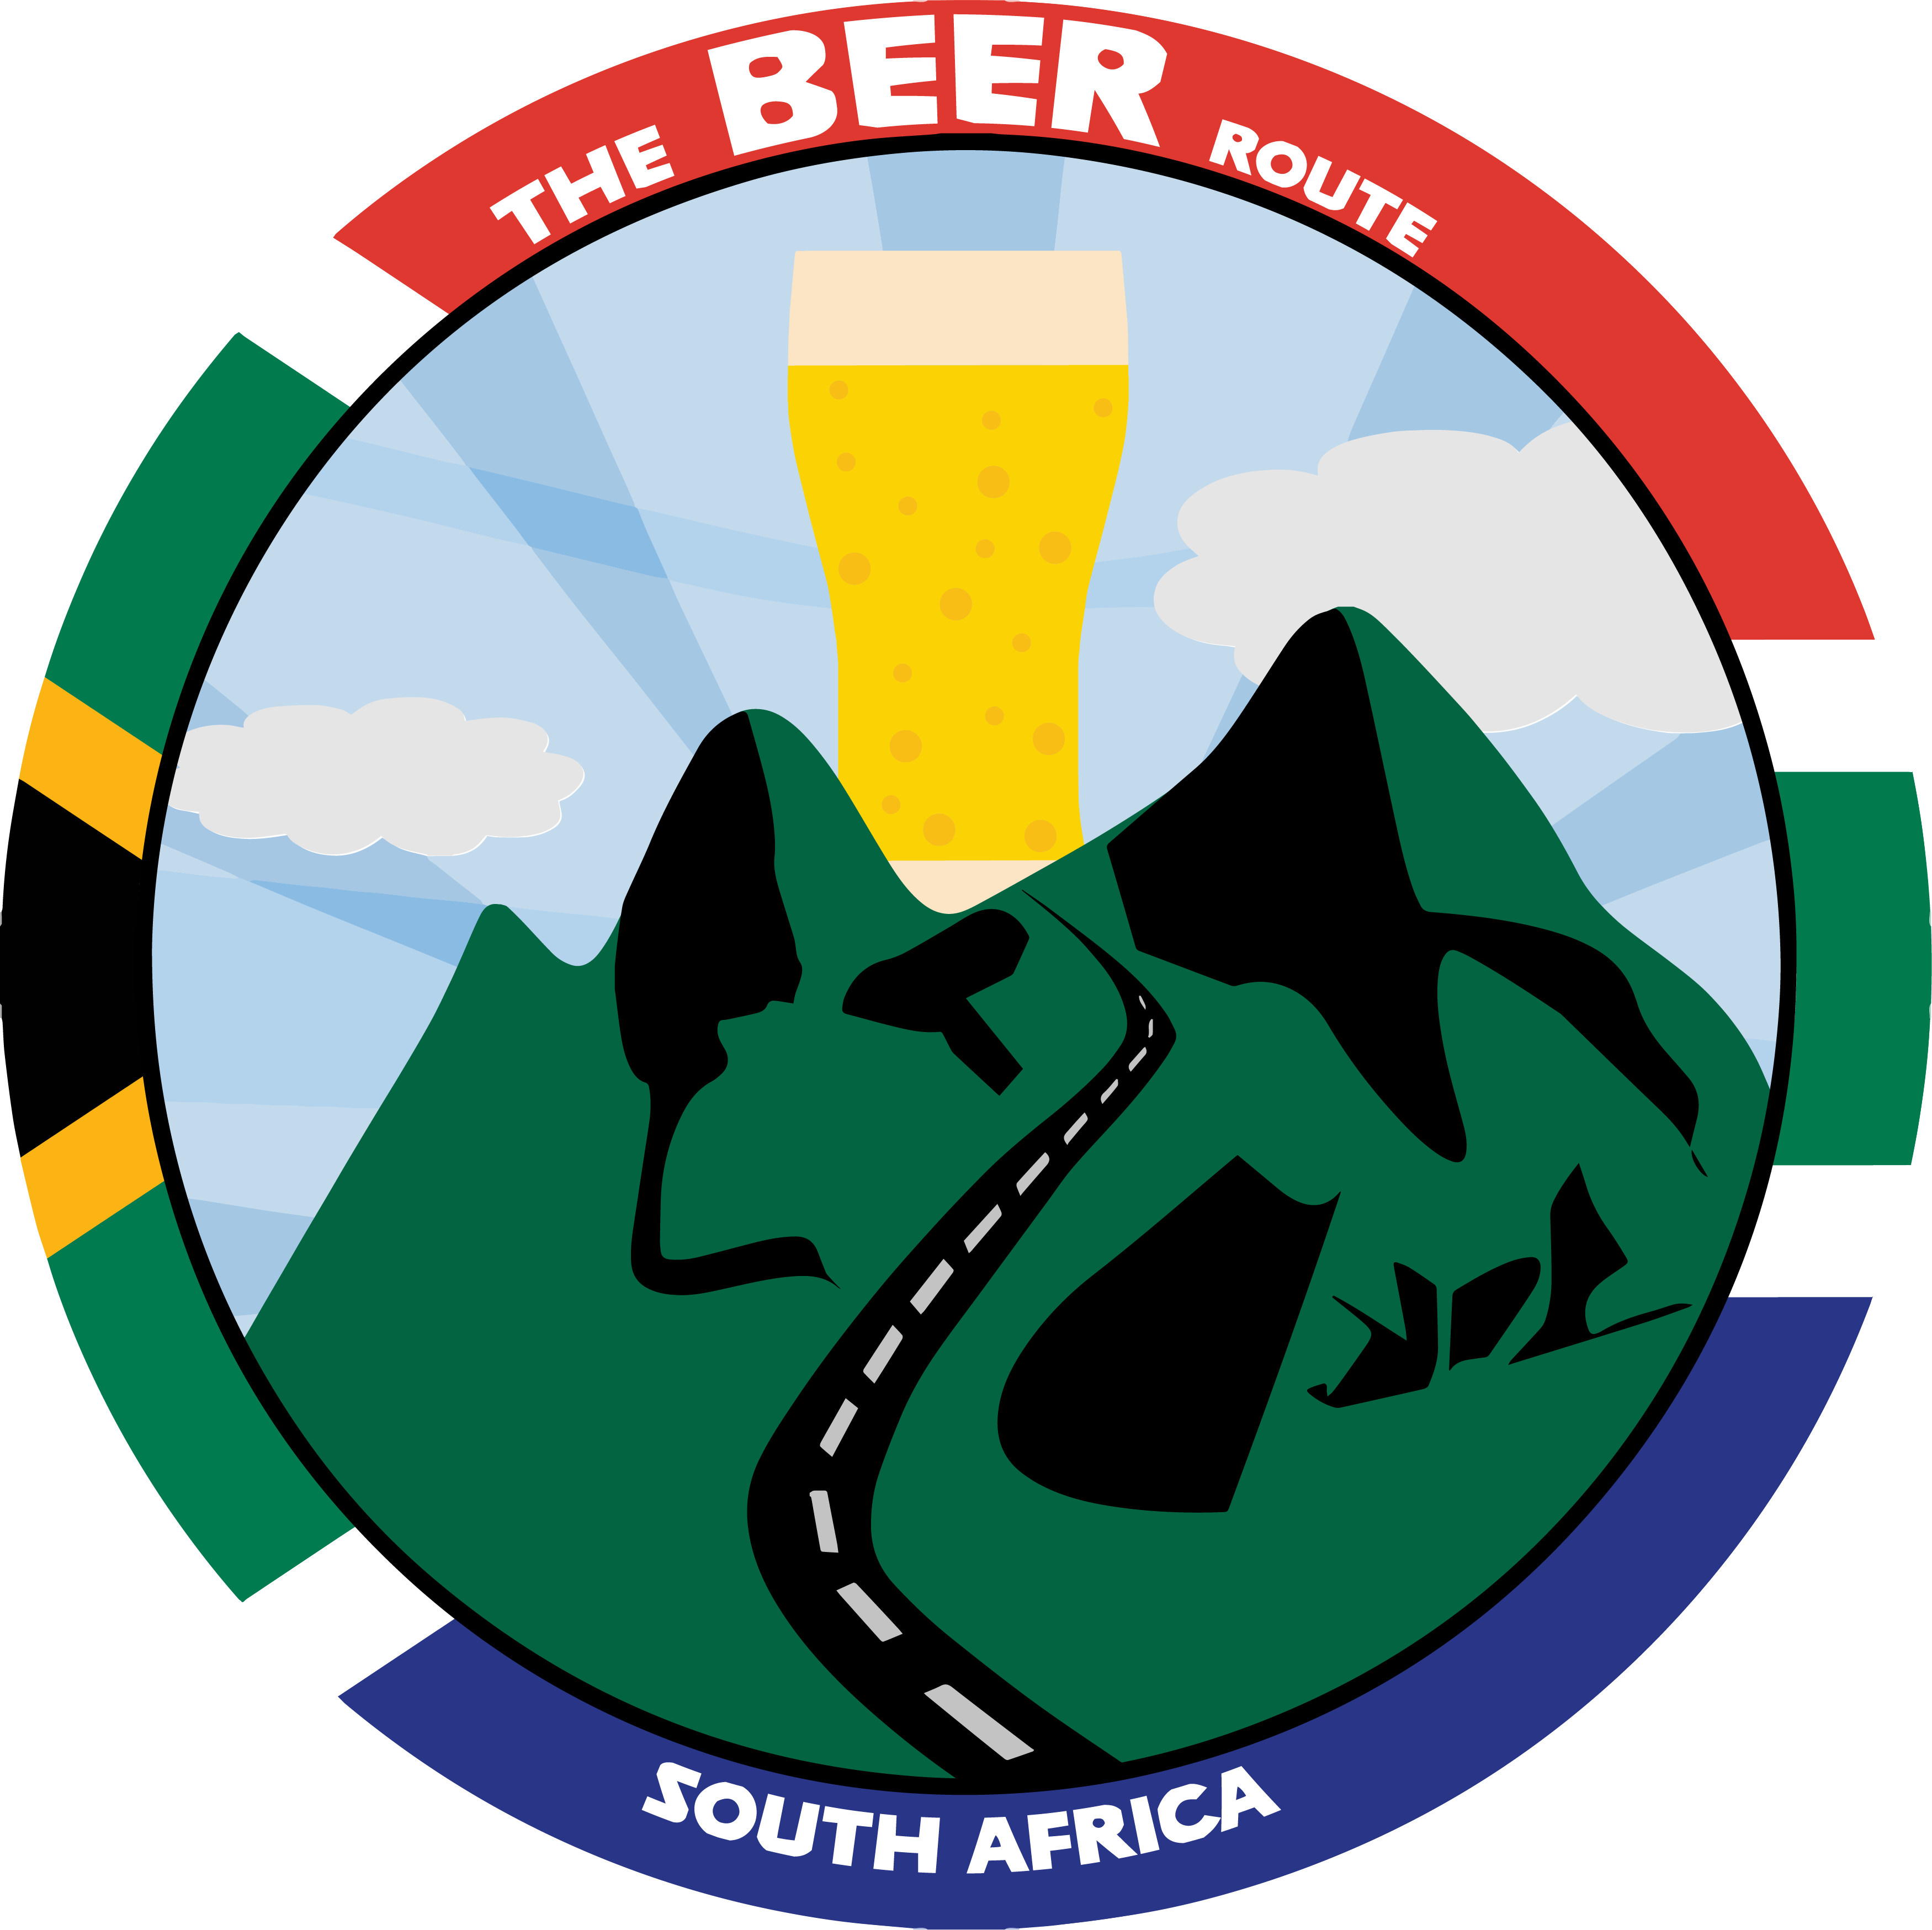 The Beer Route